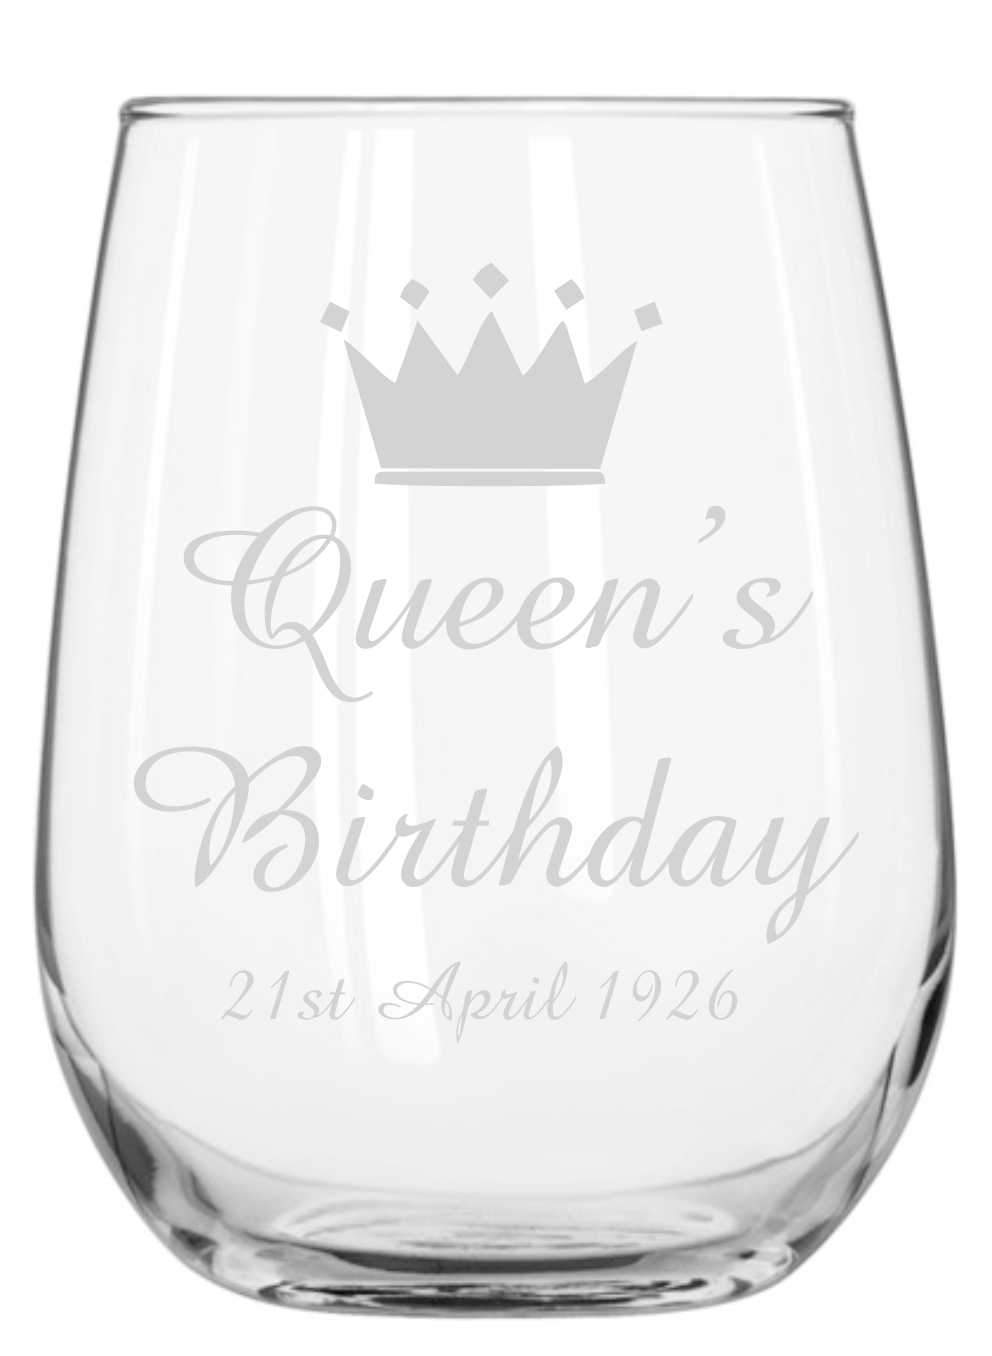 Birthday Engraved Stemless Wine Glass Personalised Glasses Engrave Works 